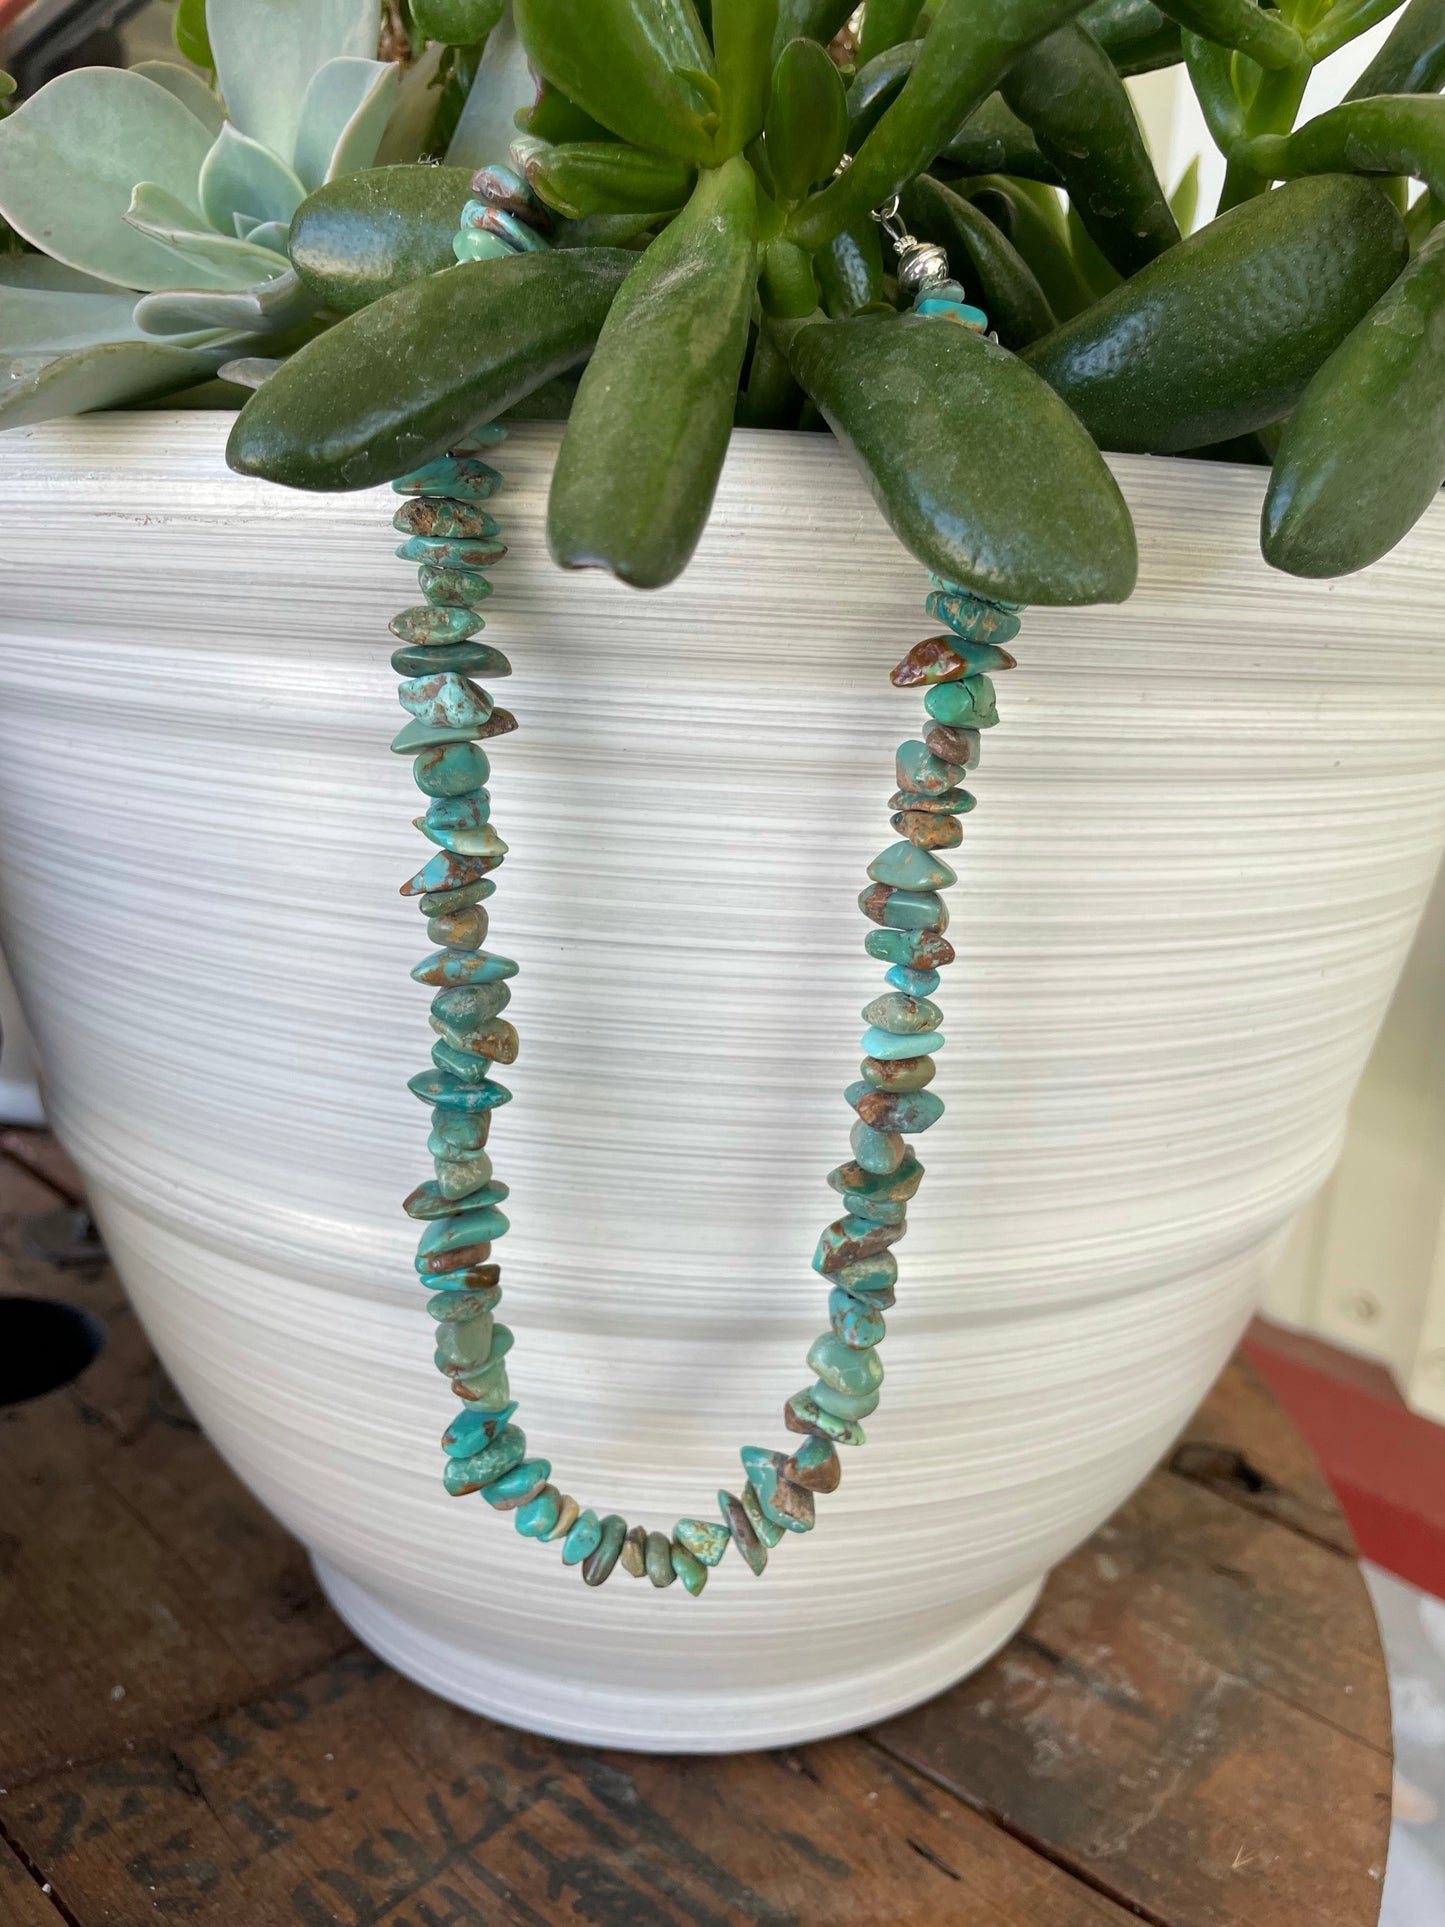 Caveman turquoise necklace